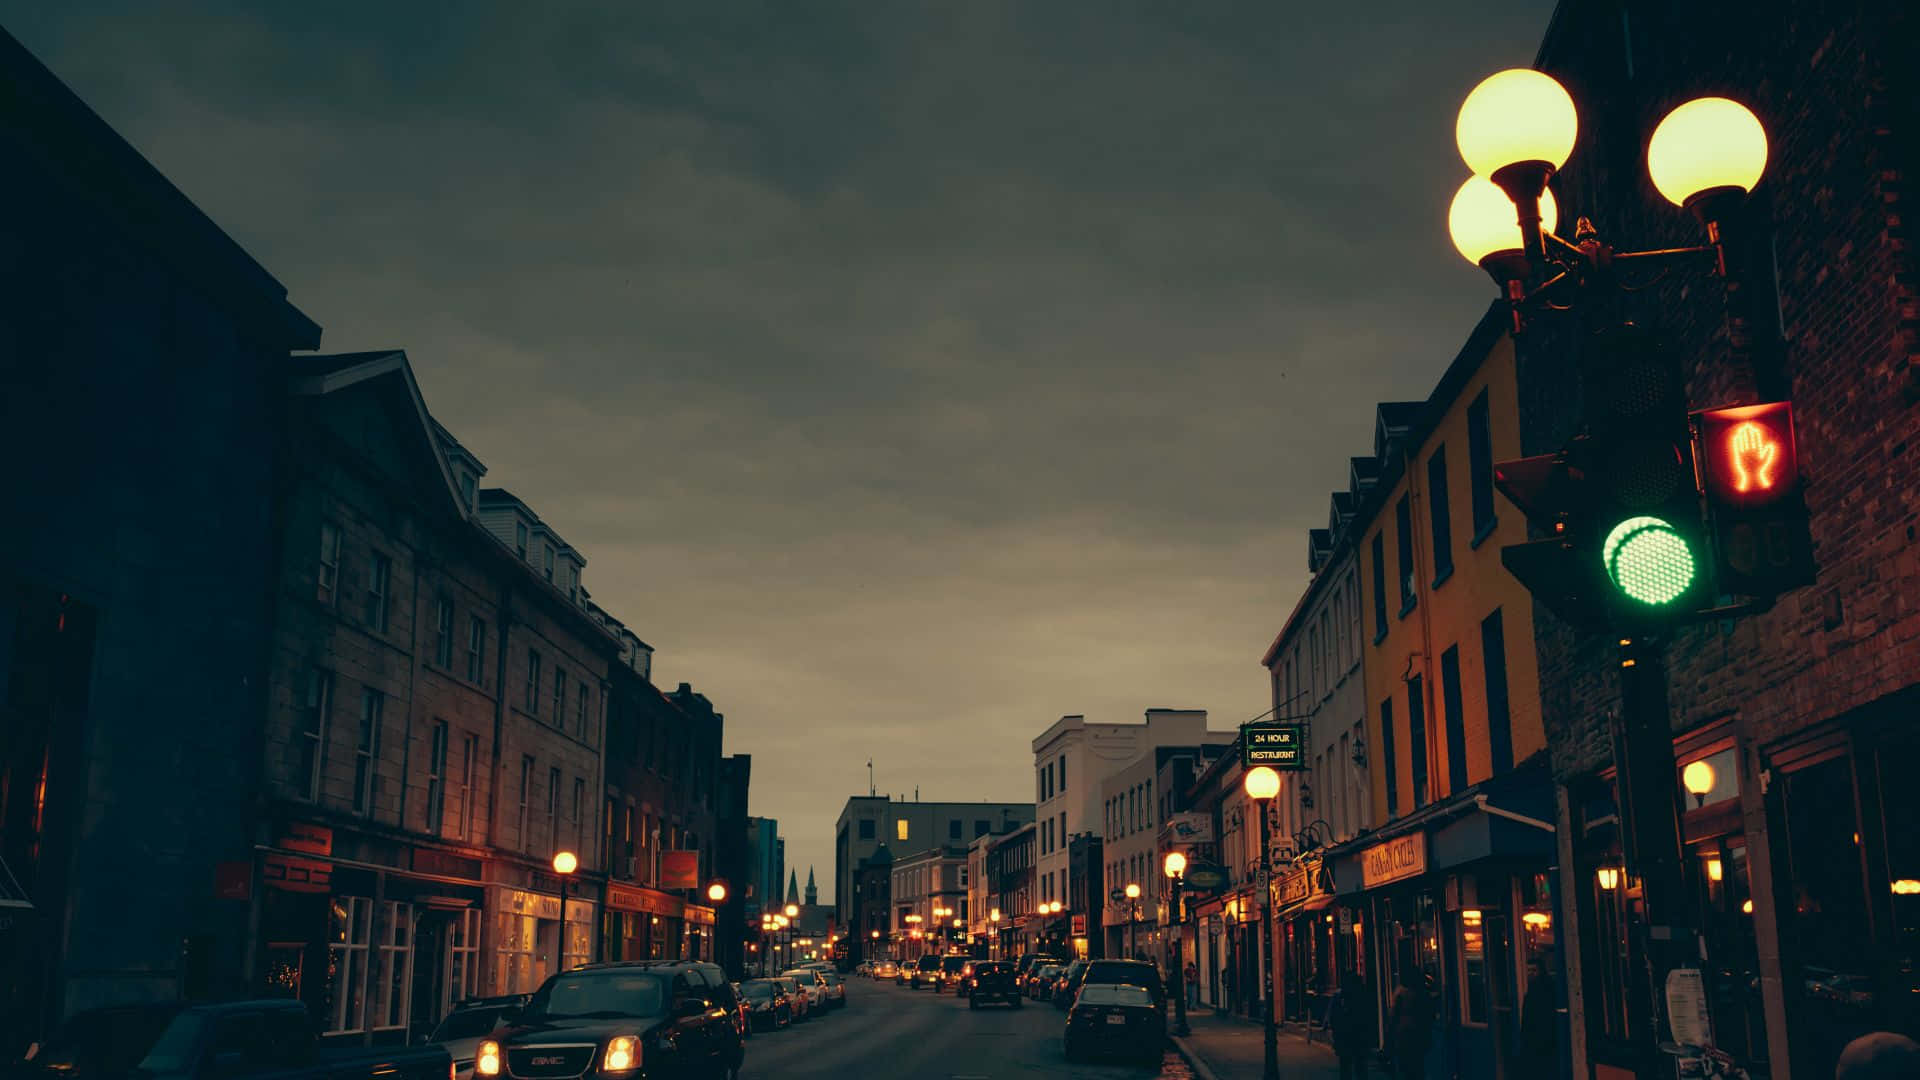 "The Glow of A Street Light at Night" Wallpaper